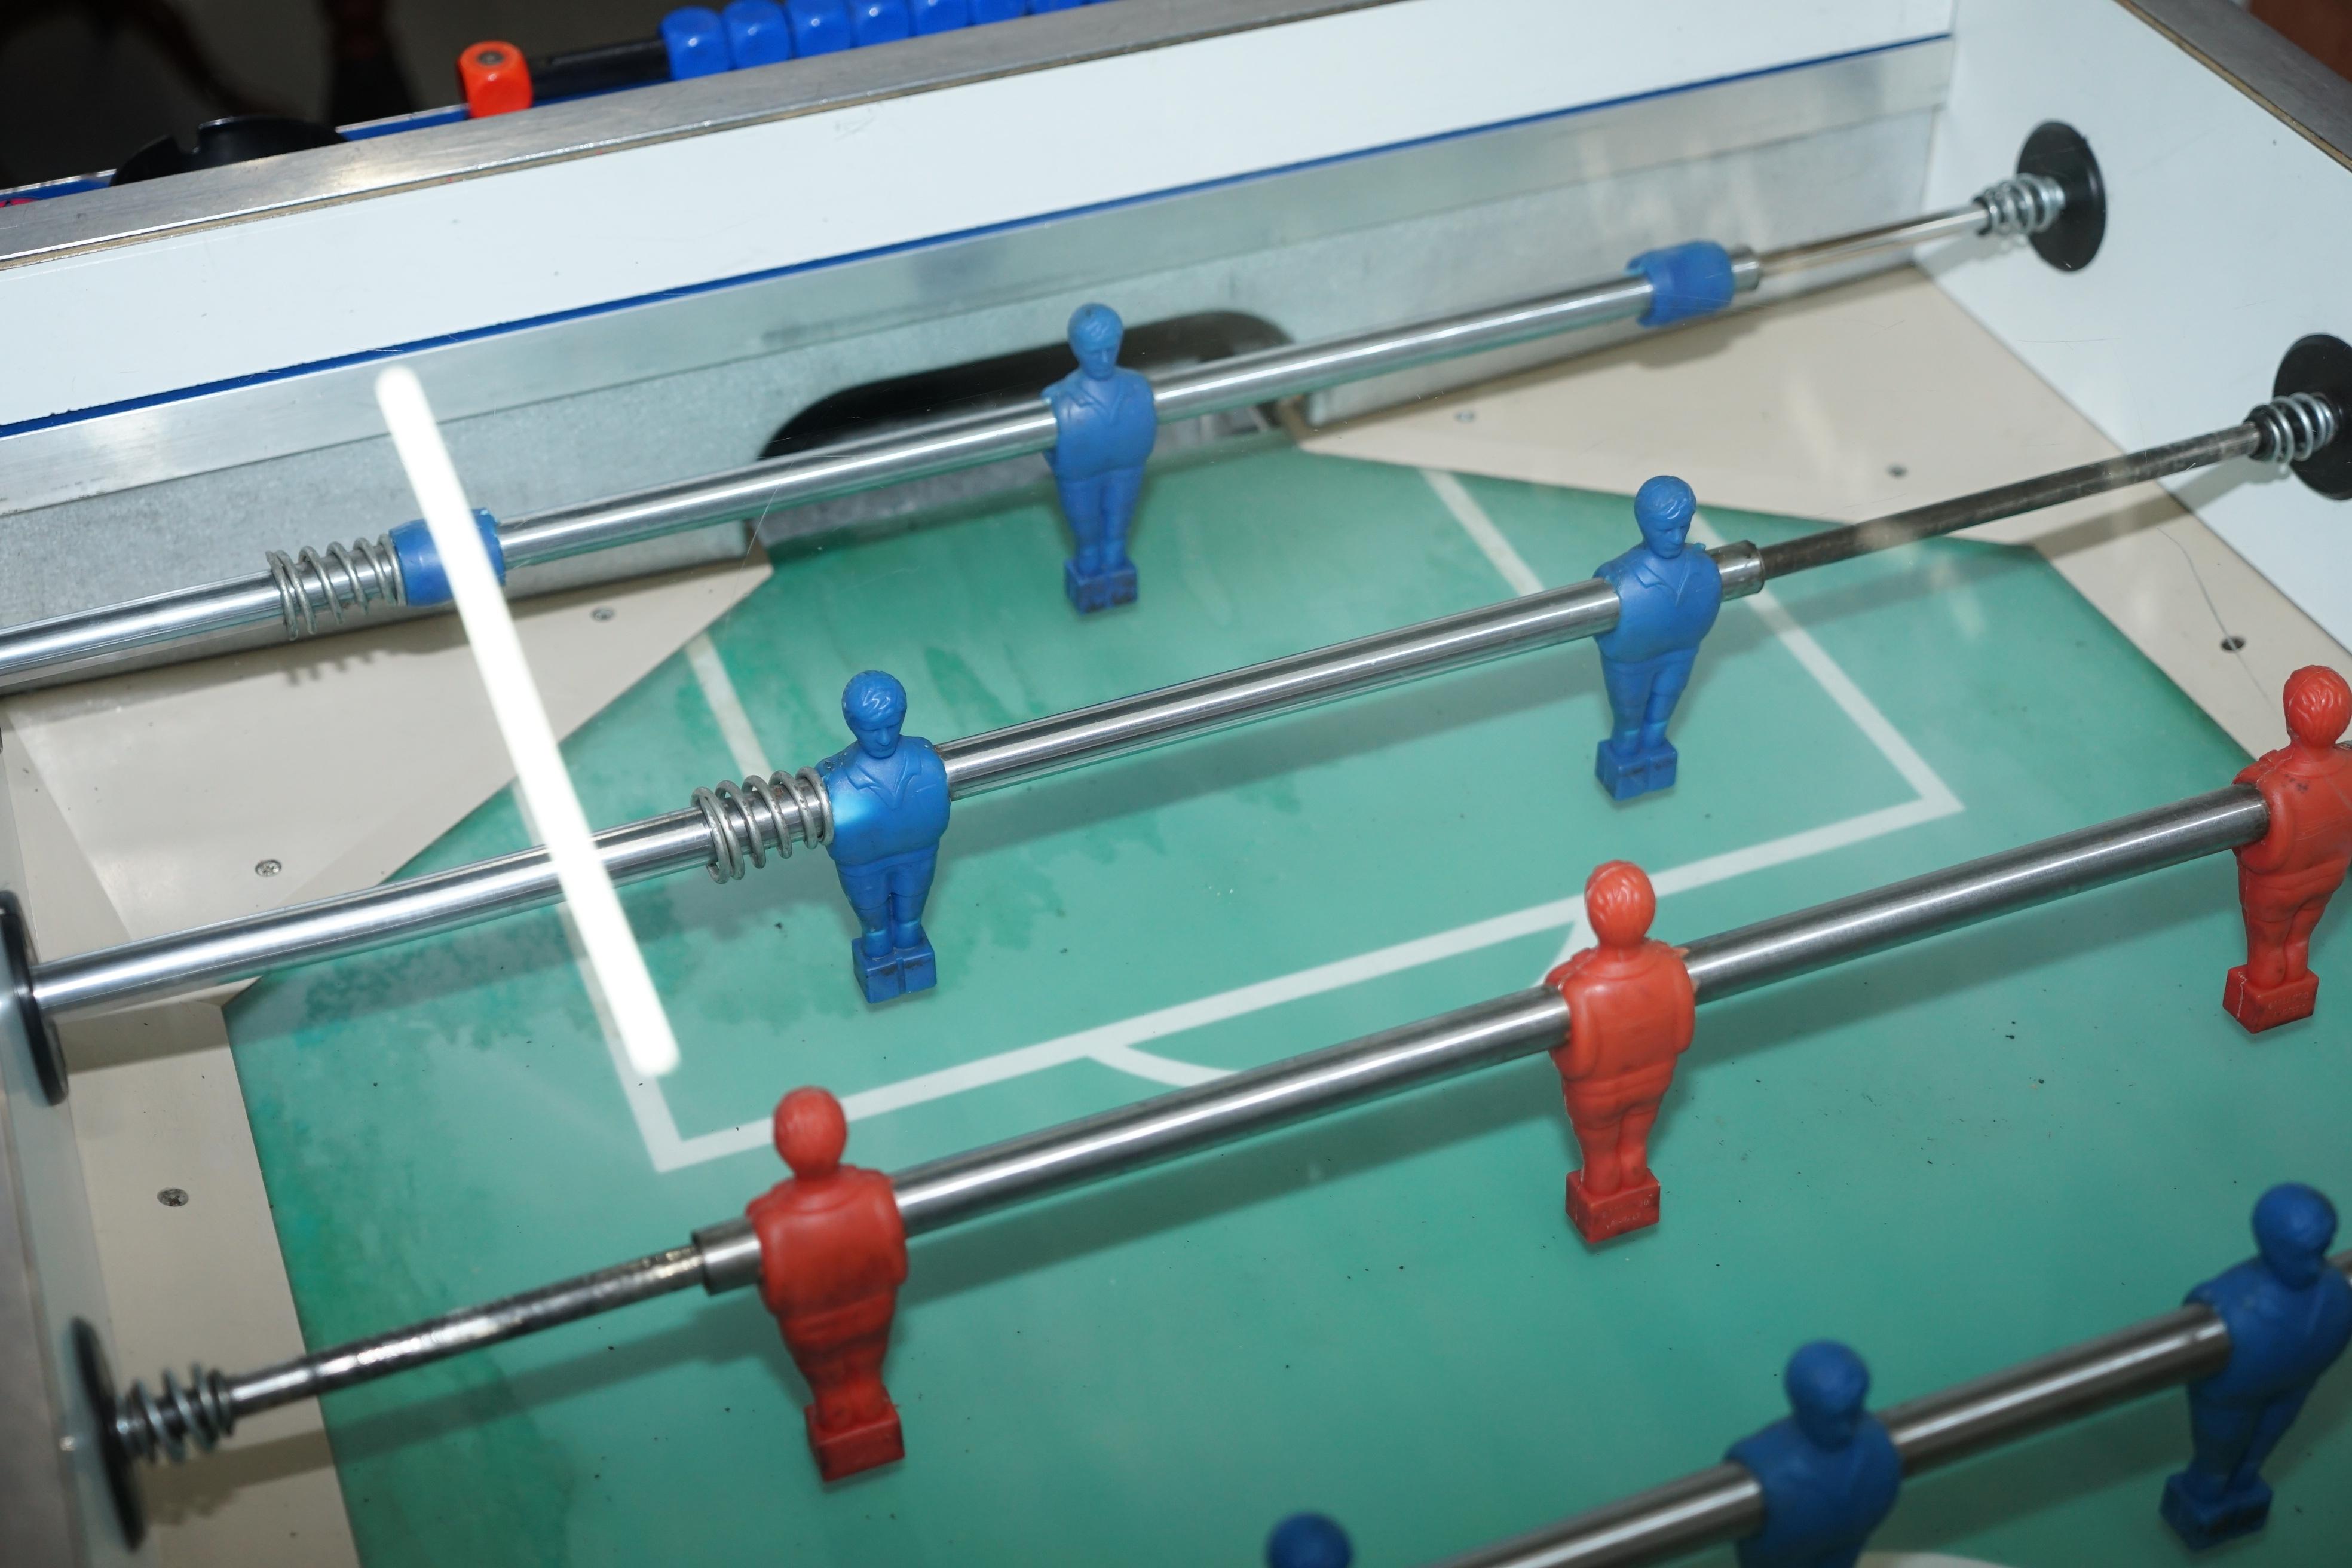 Vintage Red White & Blue Foosball Table Football Covered in Pop Culture Stickers 1